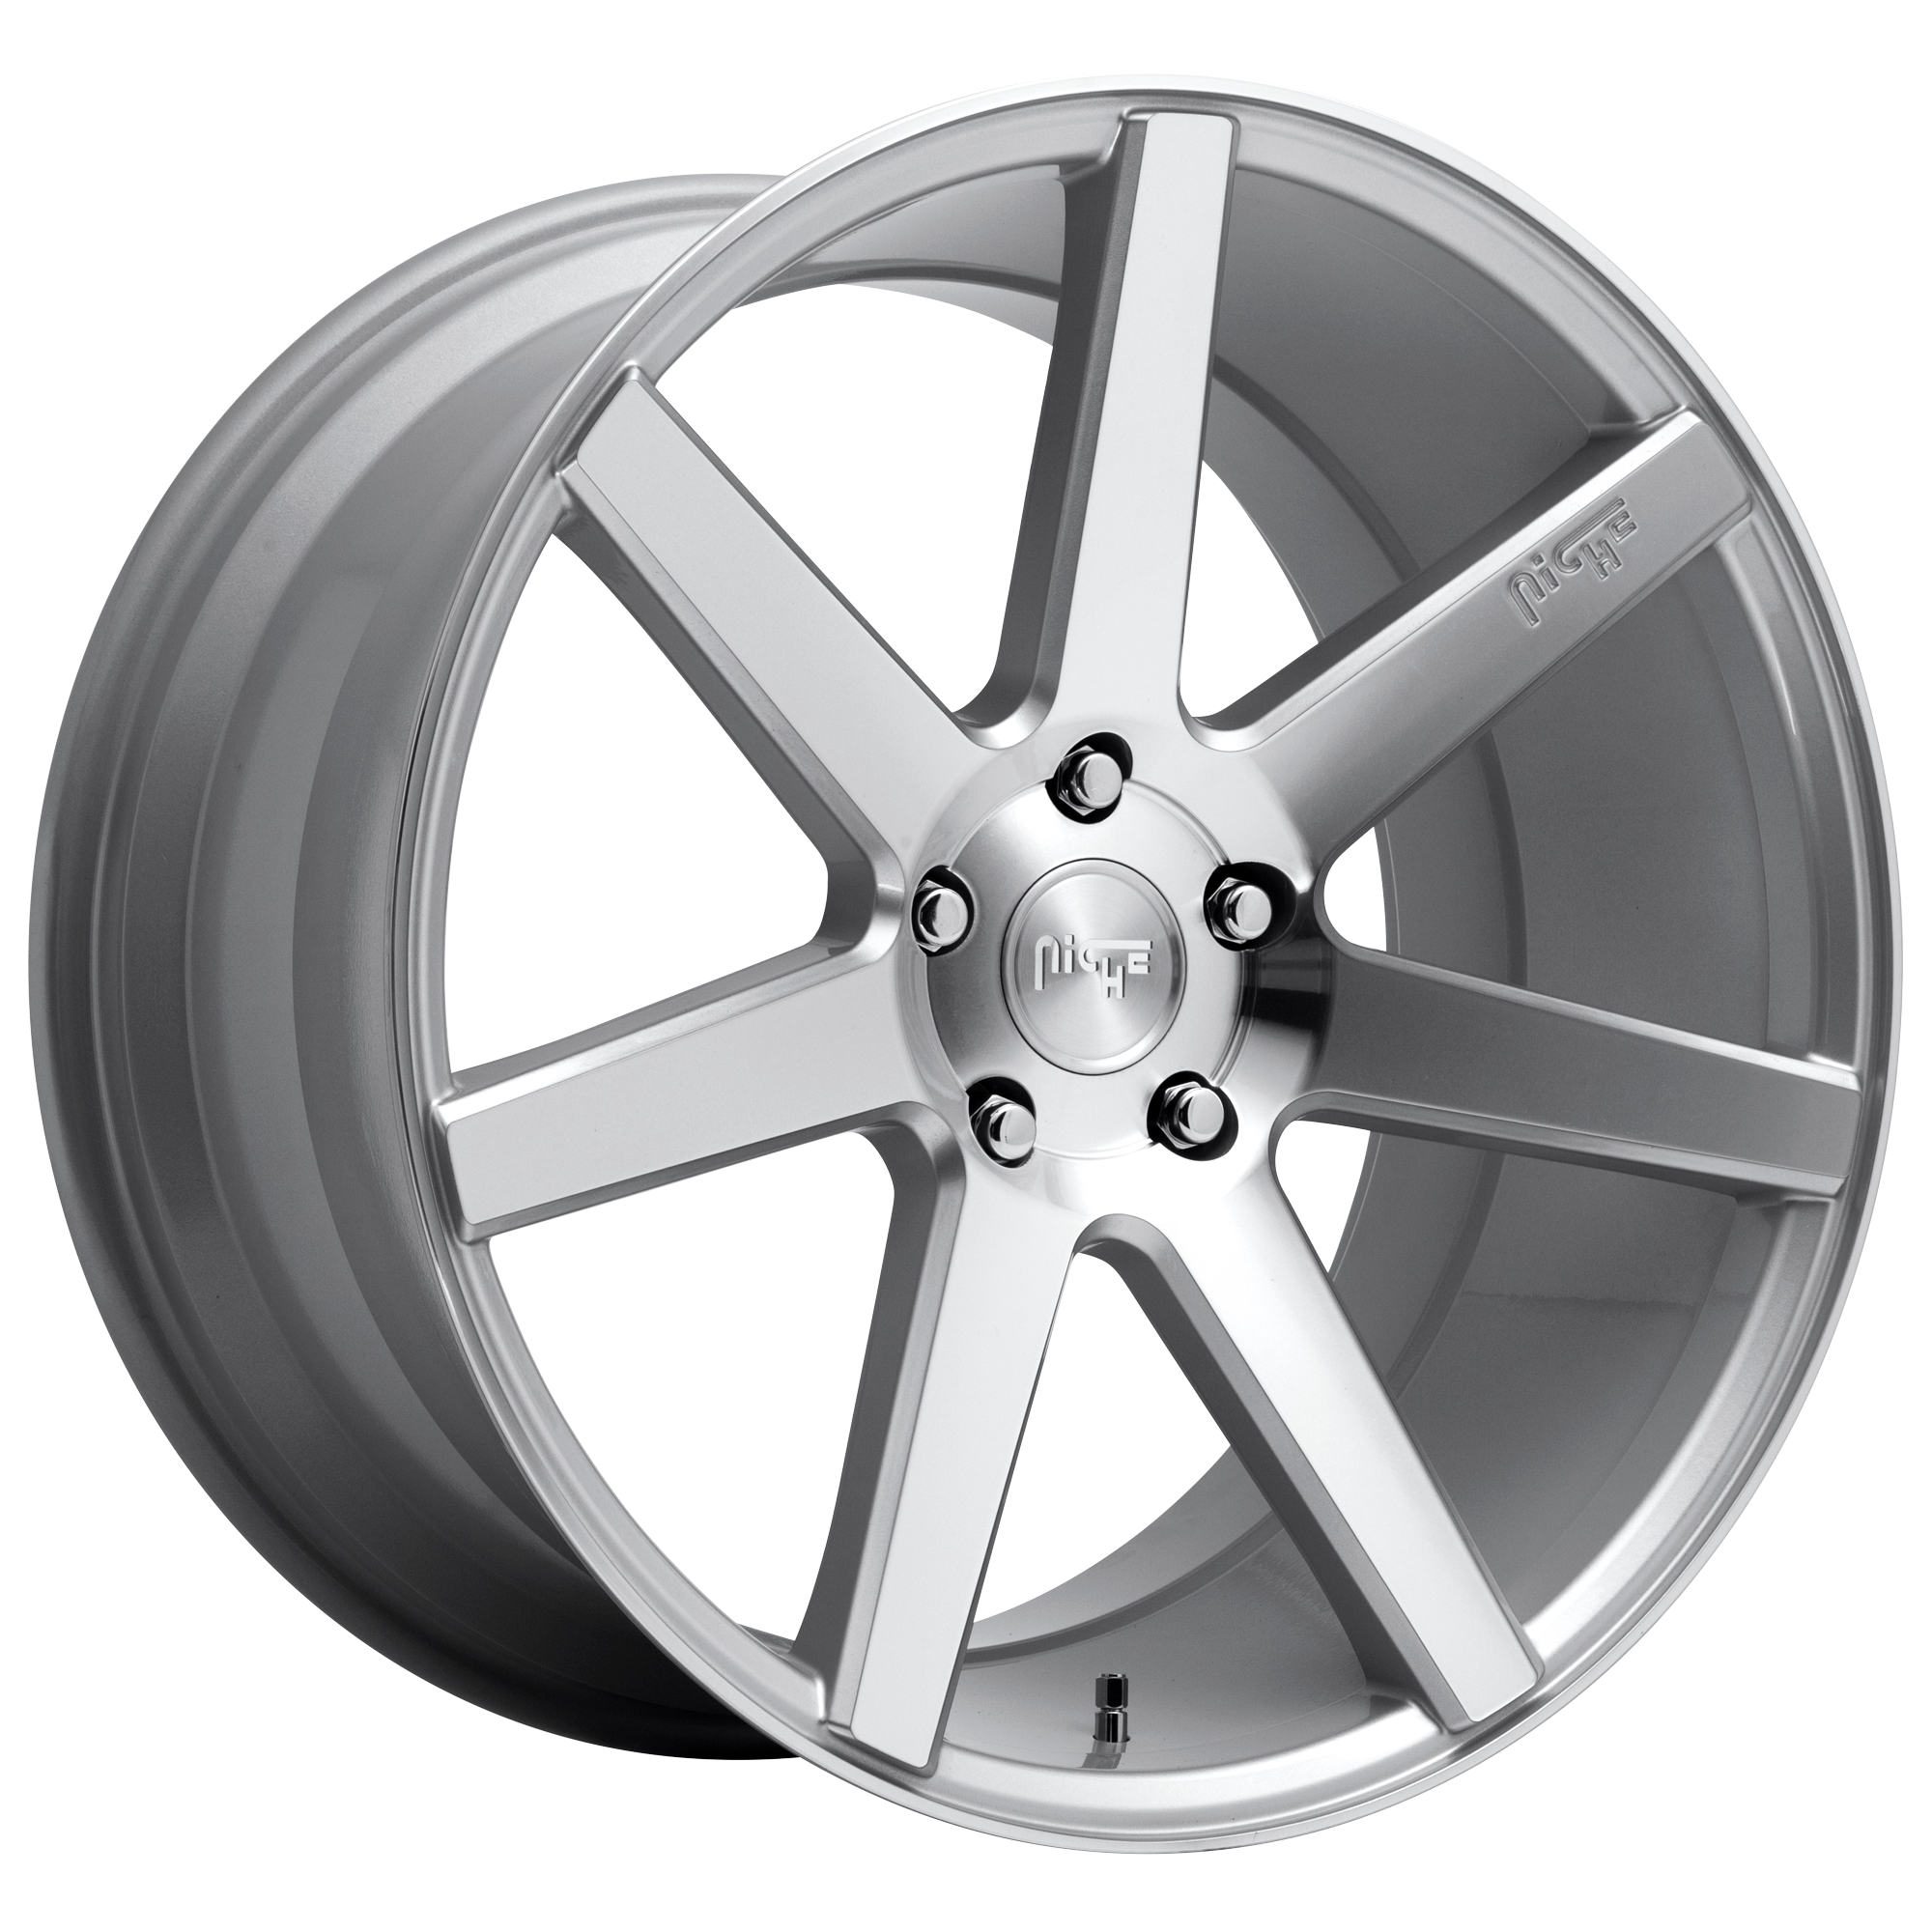 VERONA 20x10.5 5x112.00 GLOSS SILVER MACHINED (27 mm) - Tires and Engine Performance